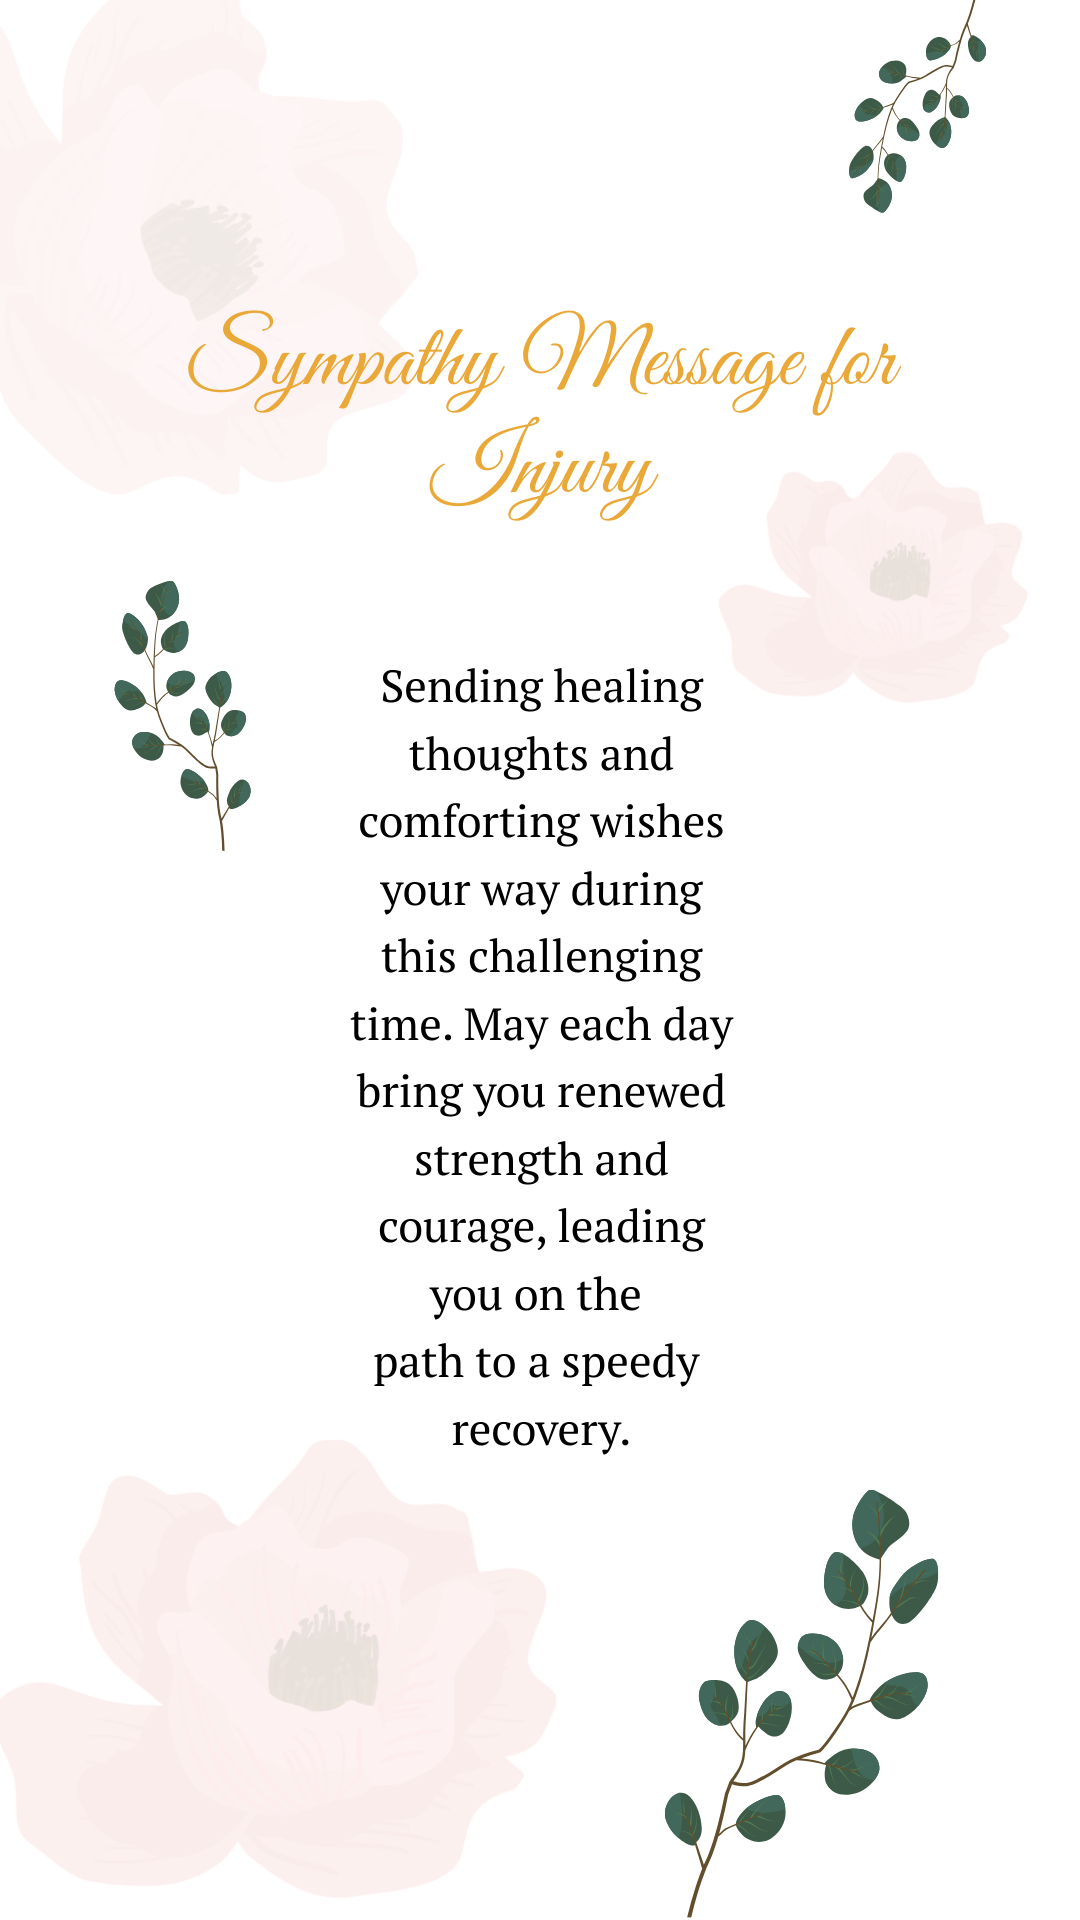 Free sympathy message for injury Template